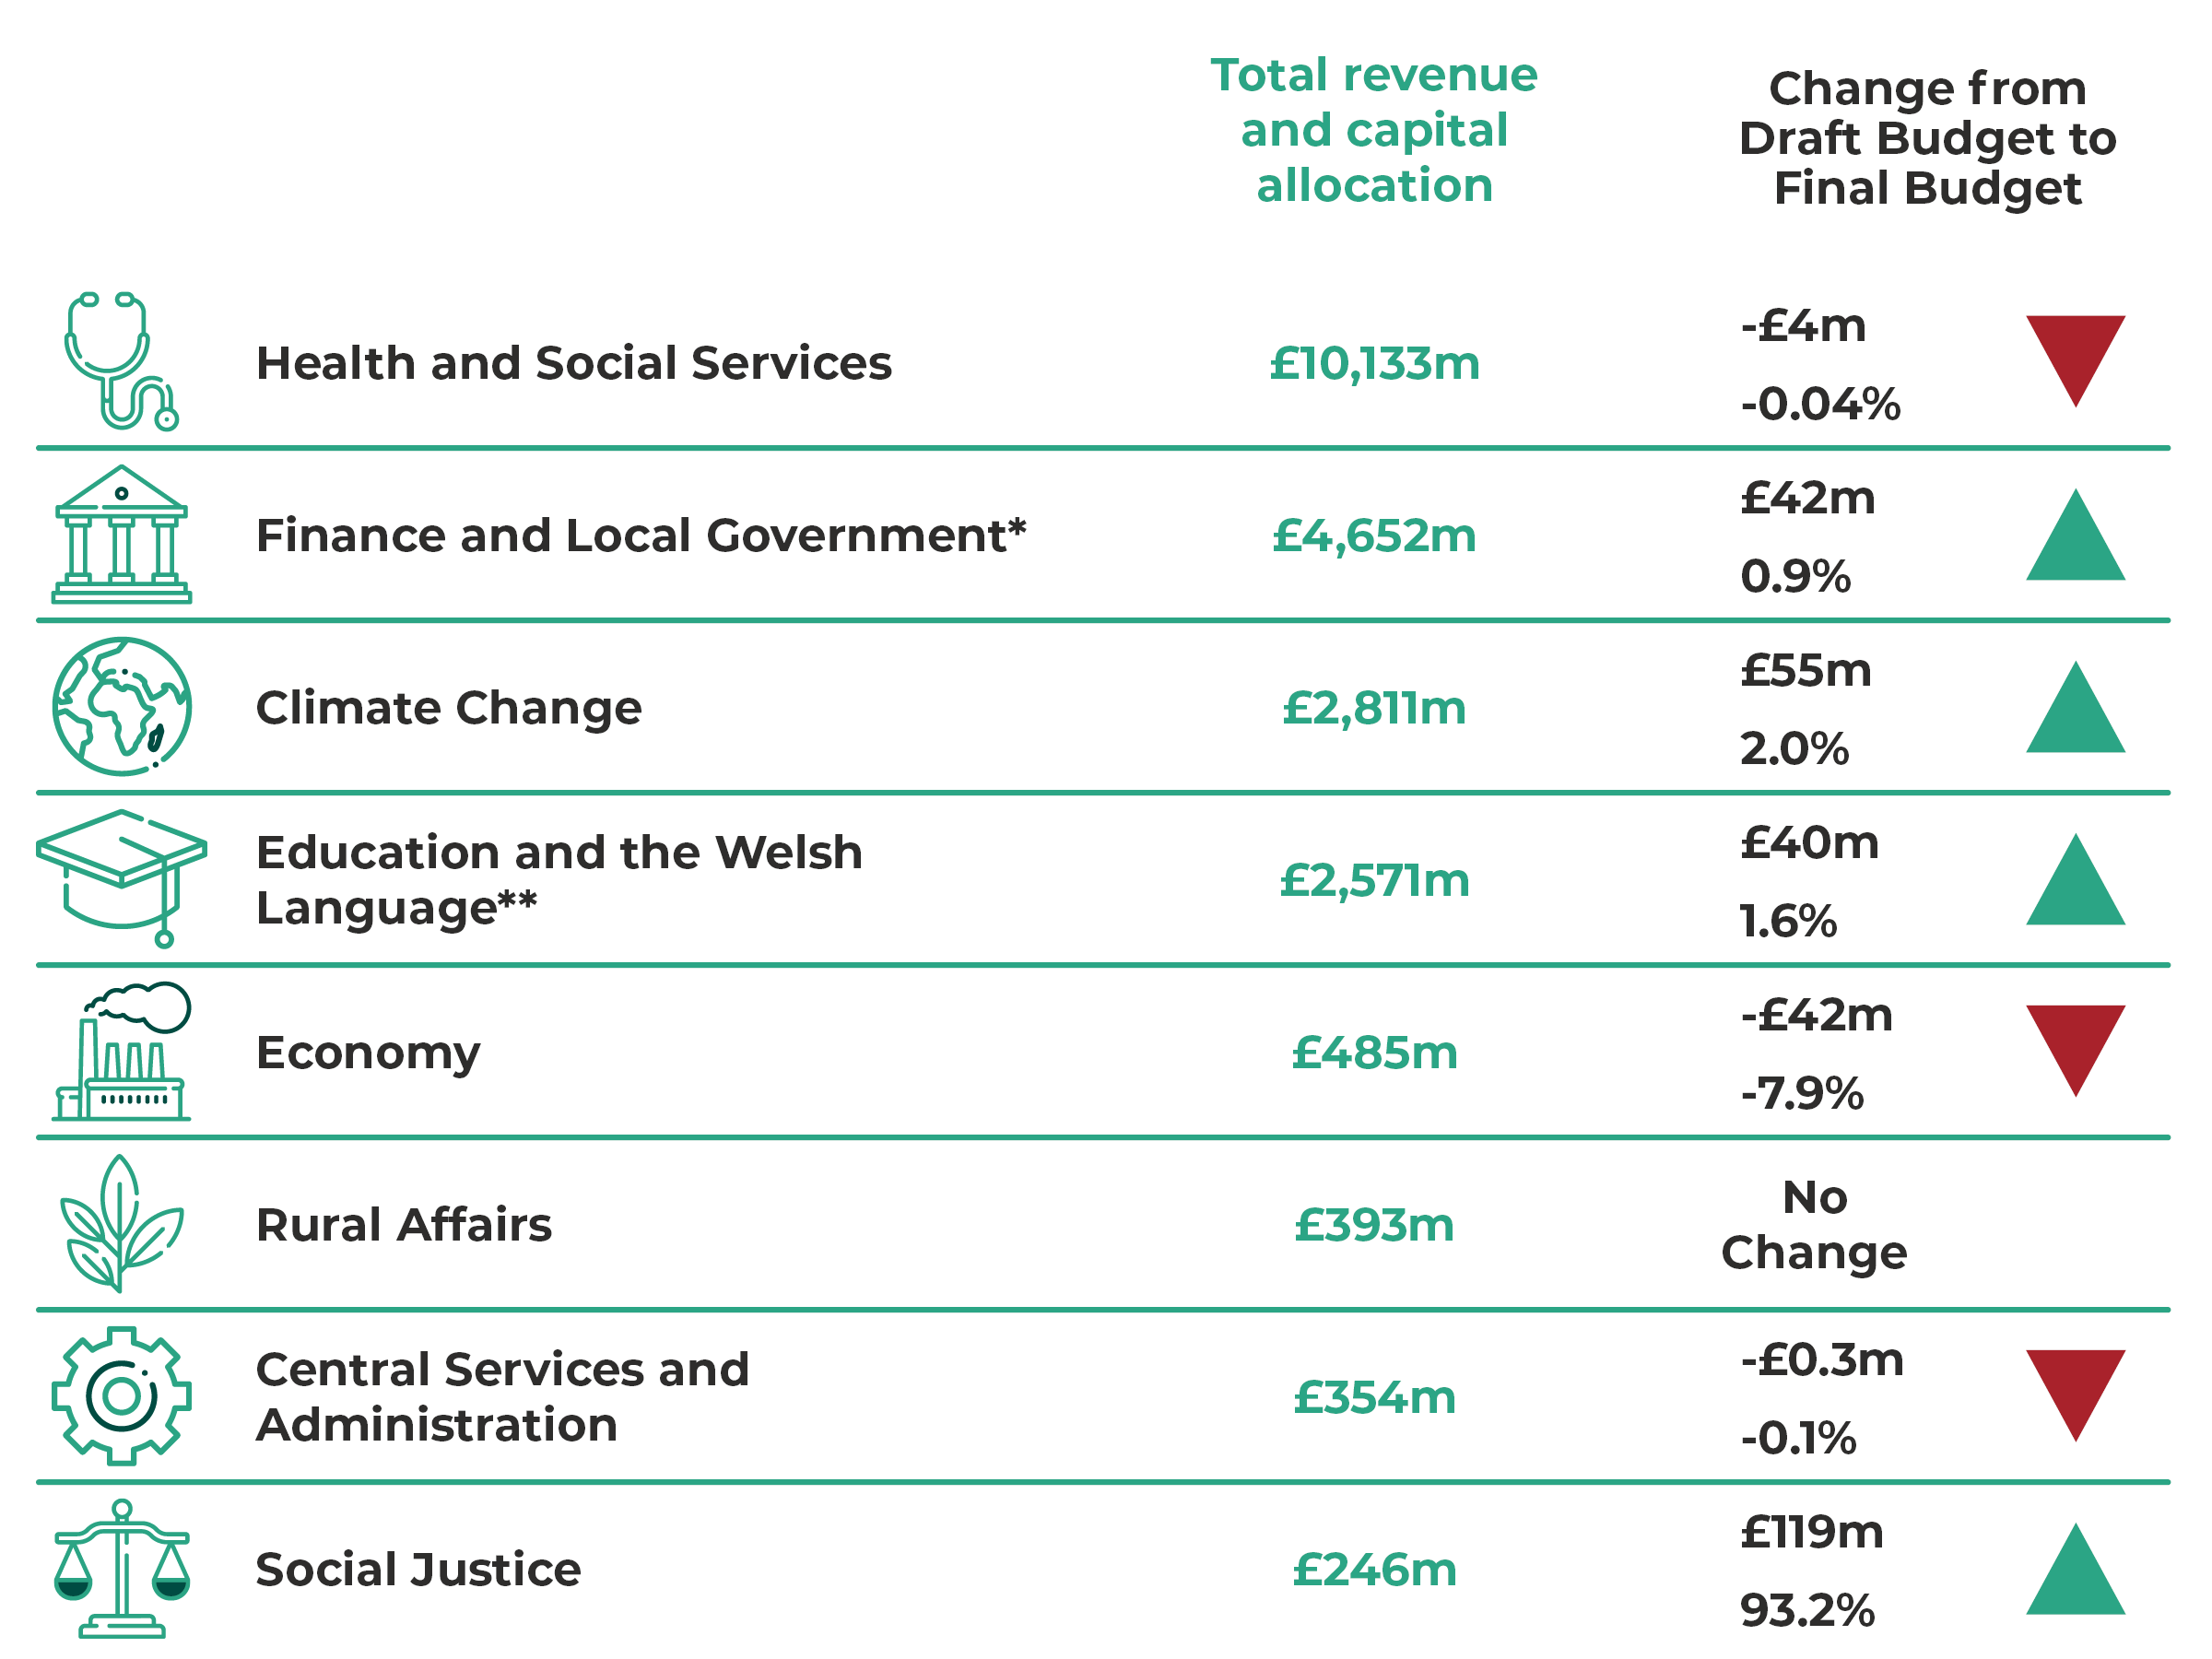 Table of total revenue and capital allocation by department. Health and Social Services: £10133m (down by £4m or 0.04%). Finance and Local Government: £4652m (up by £42m or 0.9%). Climate Change: £2811m (up by £55m or 2.0%). Education and the Welsh Language: £2571m (up by £40m or 1.6%). Economy: £485m (down by £42m or 7.9%). Rural Affairs: £393m (no change). Central Services and Administration: £354m (down by £0.3m or 0.1%). Social Justice: £246m (up by £119m or 93.2%).